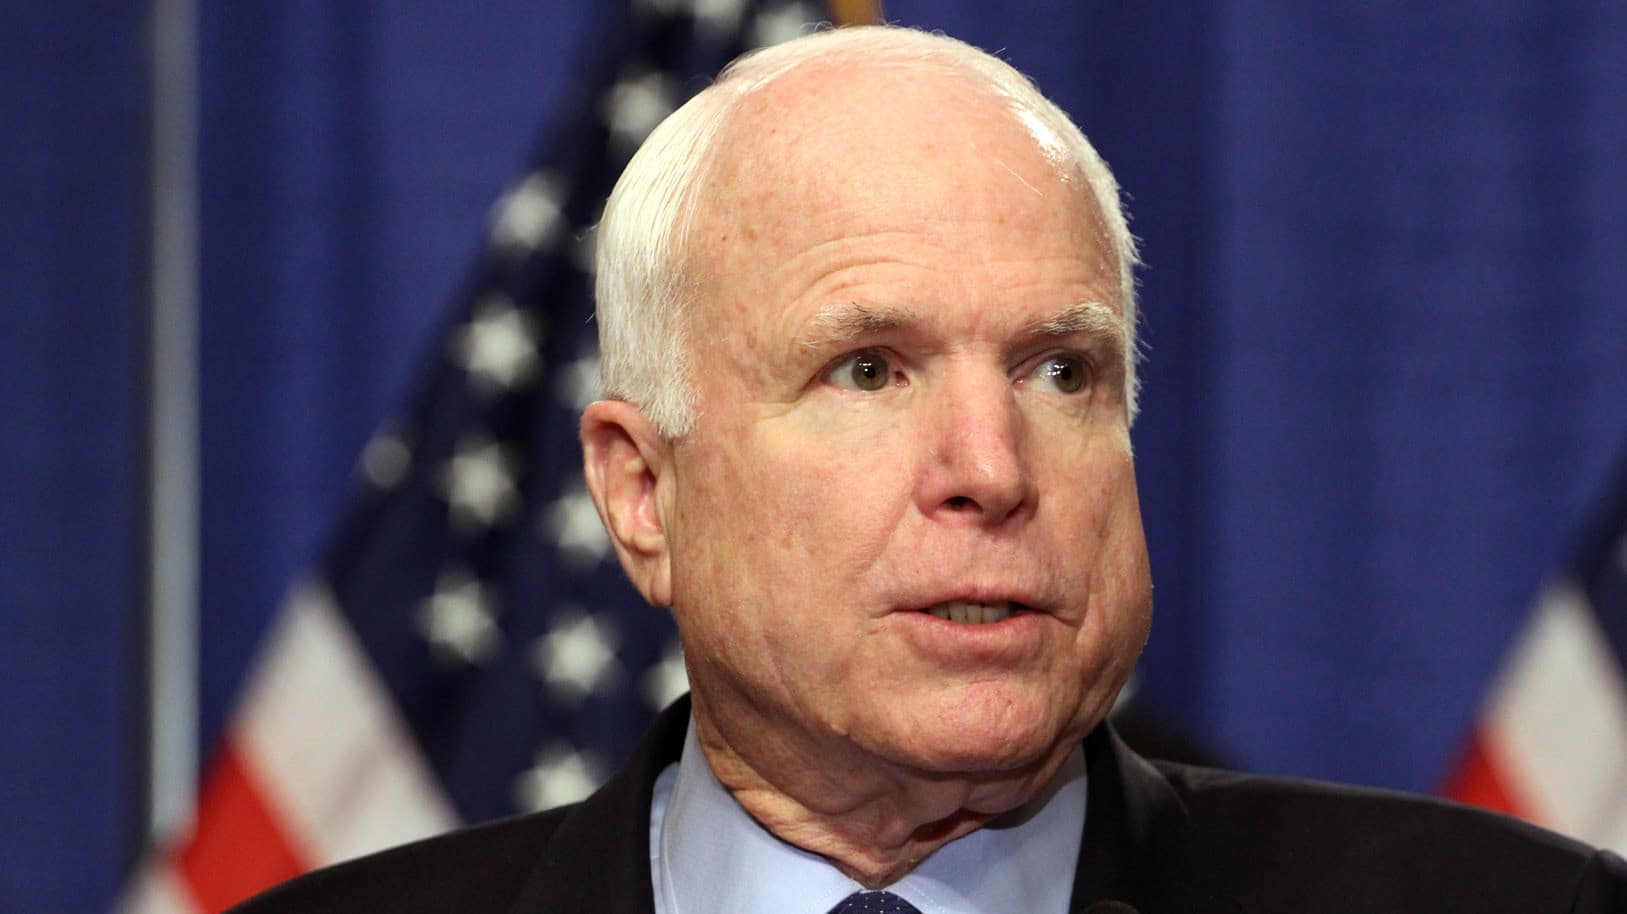 SENATOR JOHN MCCAIN OPENED UP ABOUT HIS MEDICAL CONDITION